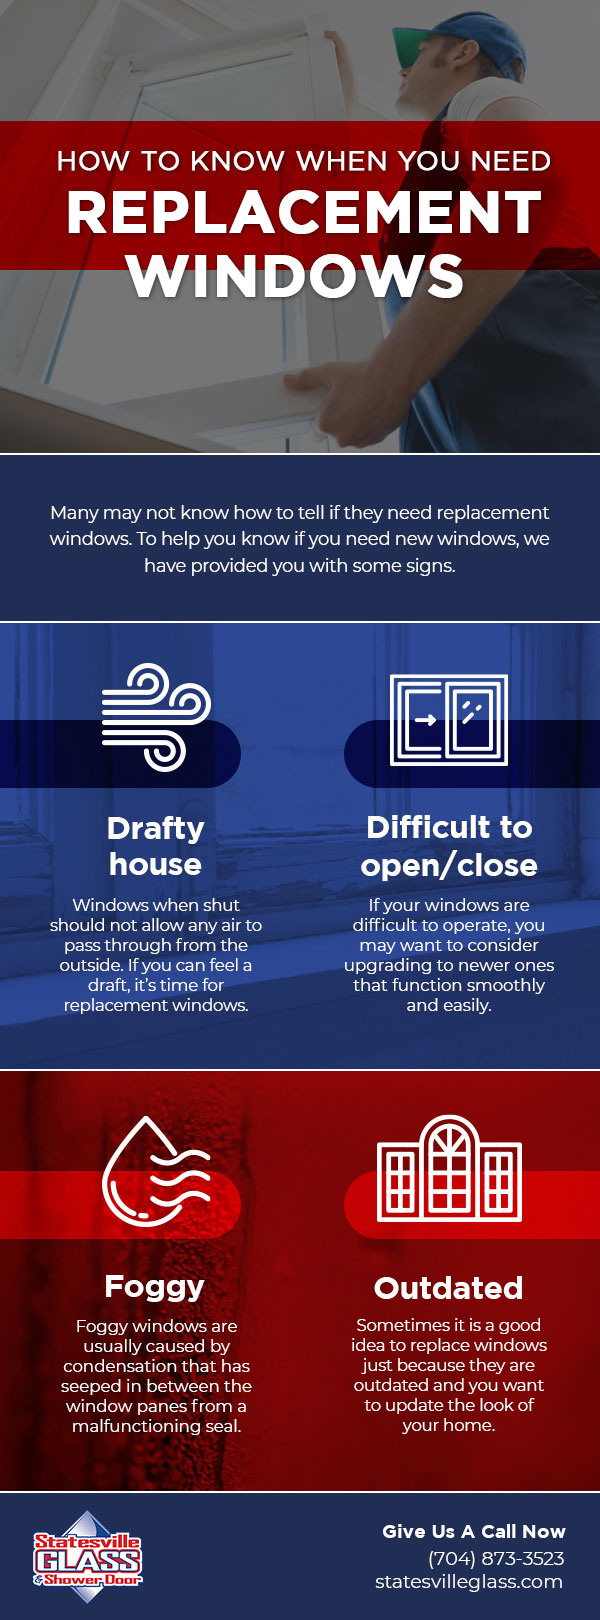 How to Know When You Need Replacement Windows 